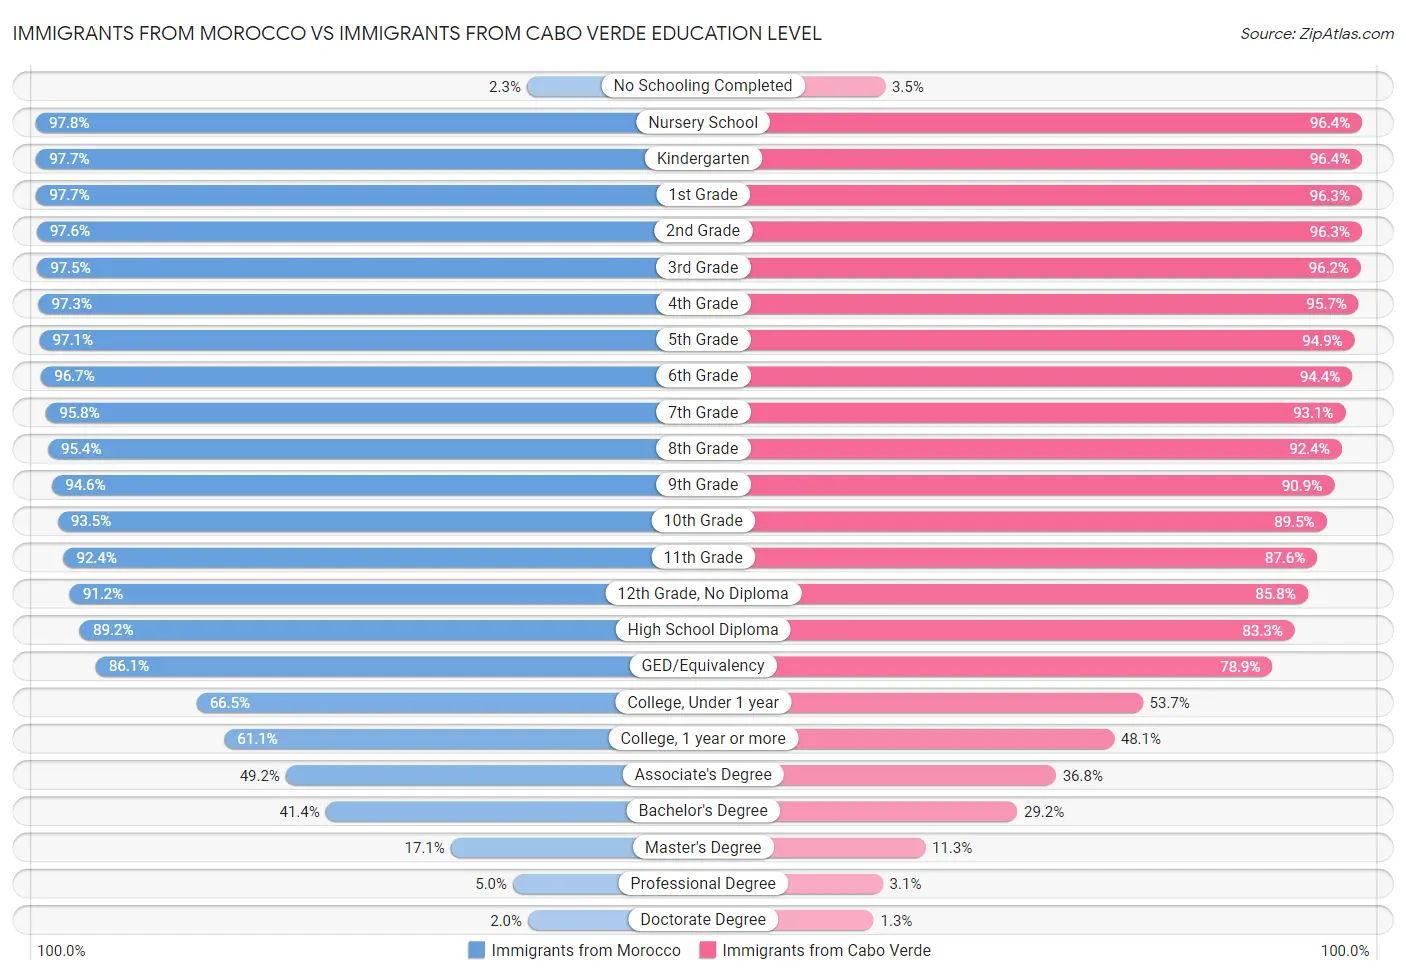 Immigrants from Morocco vs Immigrants from Cabo Verde Education Level